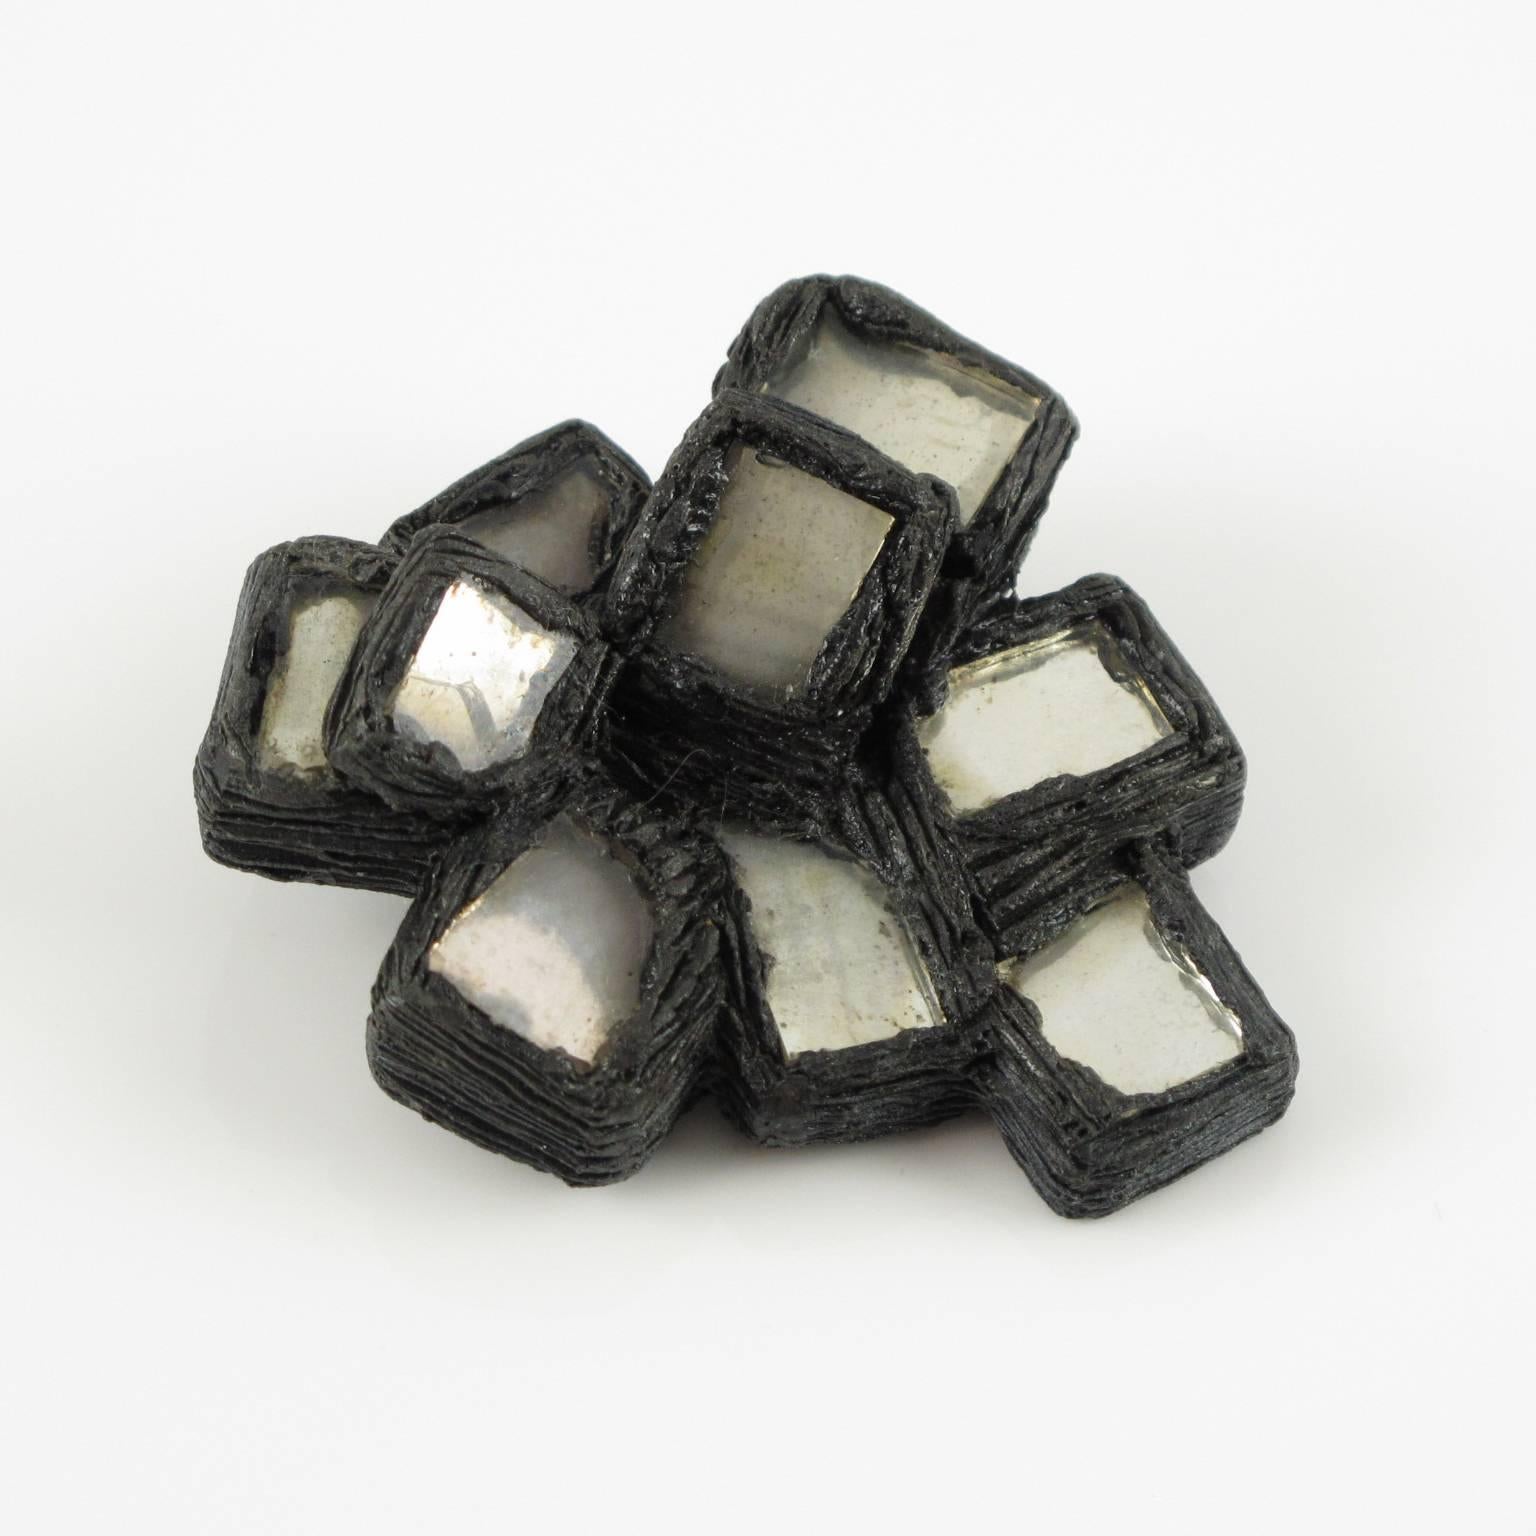 Rare Line Vautrin Talosel Resin geometric brooch pin. Encrusted with clear mirrored glass with iridescence in a modernist shape. Glass and Talosel, a technique created by Line Vautrin, in which she used cellulose acetate that was fractured into tiny